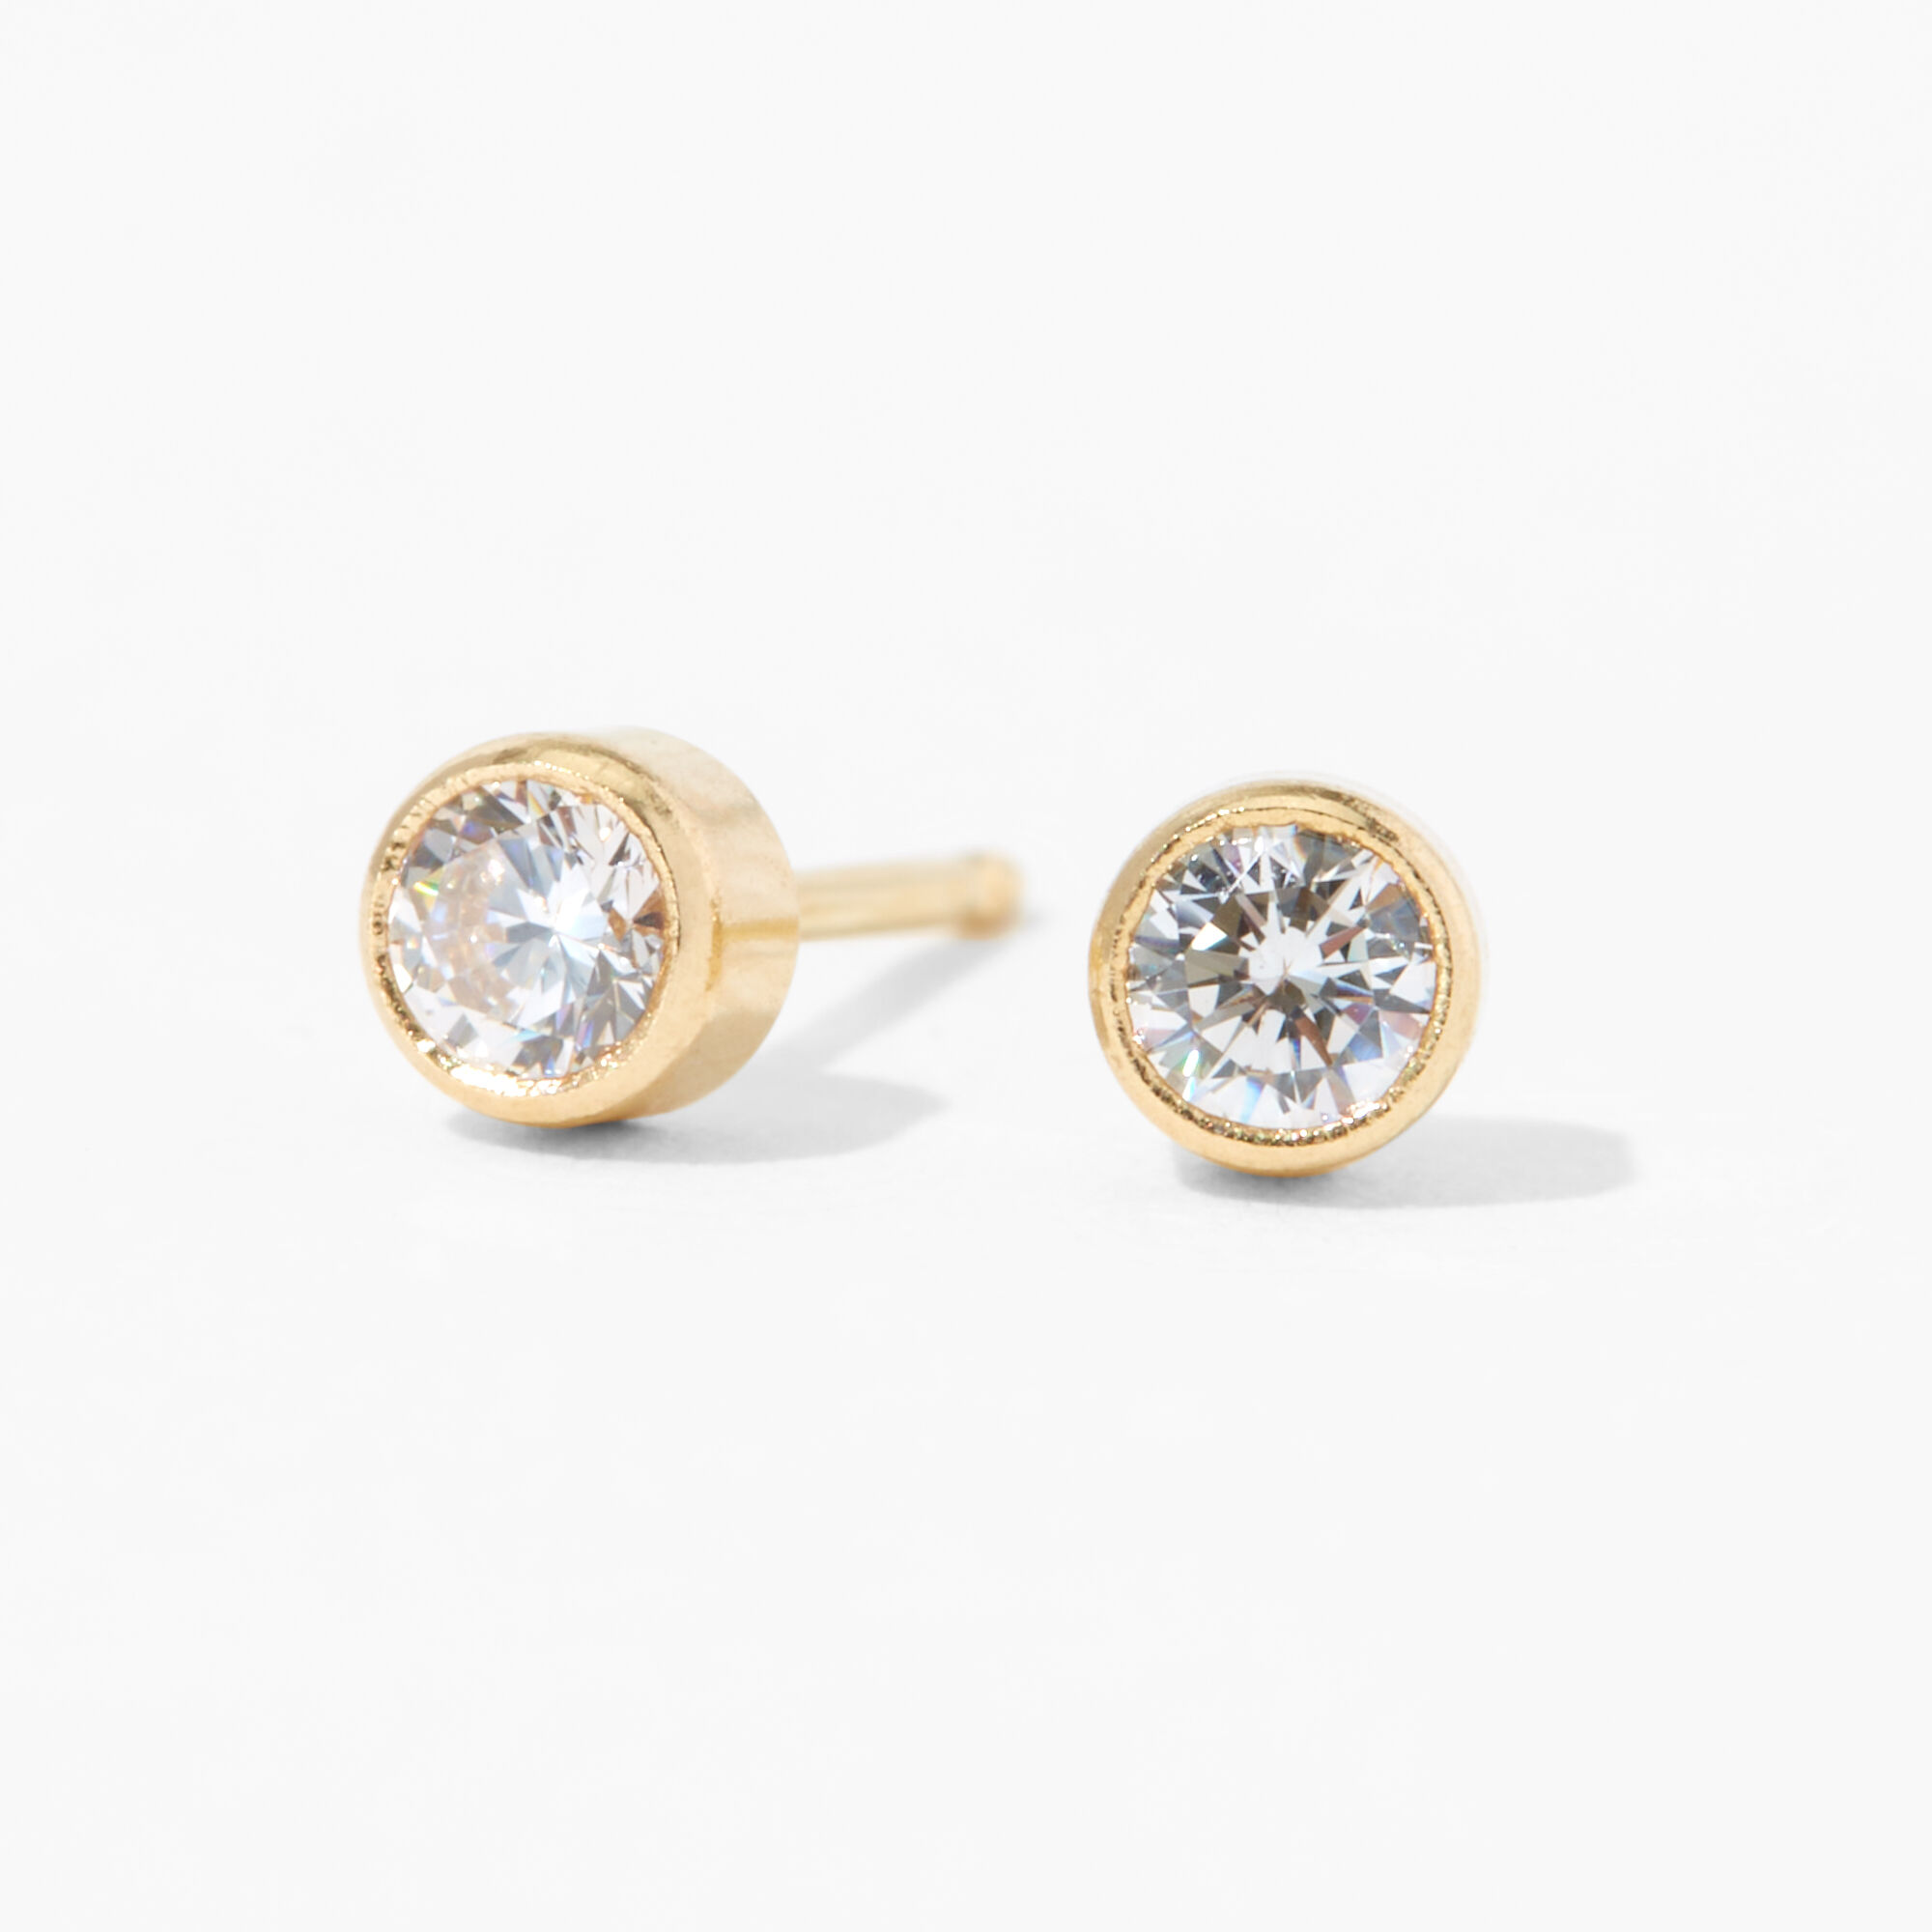 Claire 18k White Gold Plated Earrings with Swarovski Crystal – Cate & Chloe